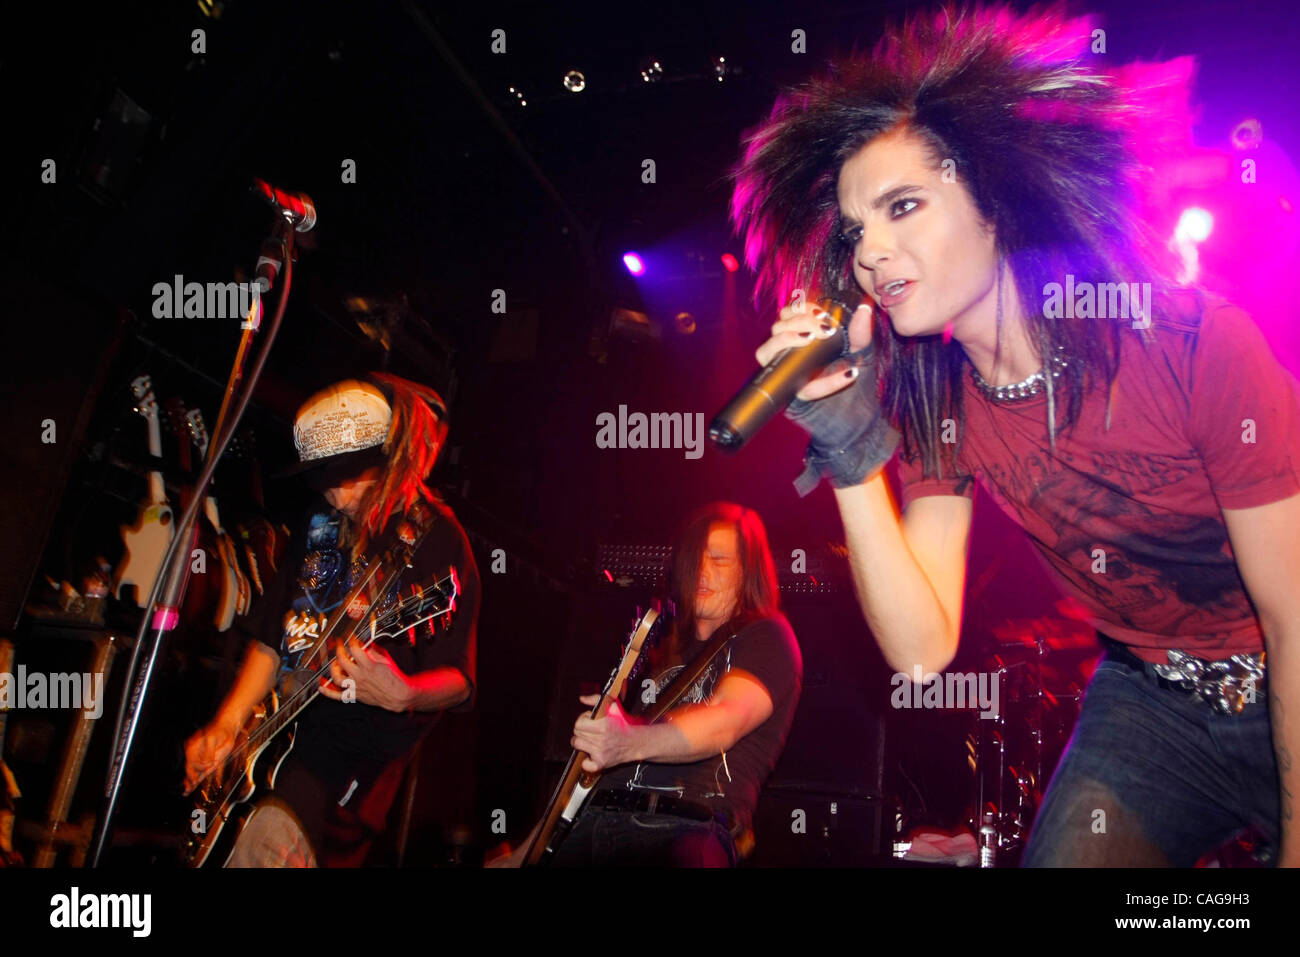 Tokio Hotel performing at The Fillmore at Irving Plaza on February 18, 2008.  Bill Kaulitz- lead vocals - (black hair) Tom Kaulitz - lead guitar (dreads) Georg Listing- bass (long straight brown hair) Gustav Schafer- drumsTokio Hotel performing at The Fillmore at Irving Plaza on February 18, 2008.   Stock Photo